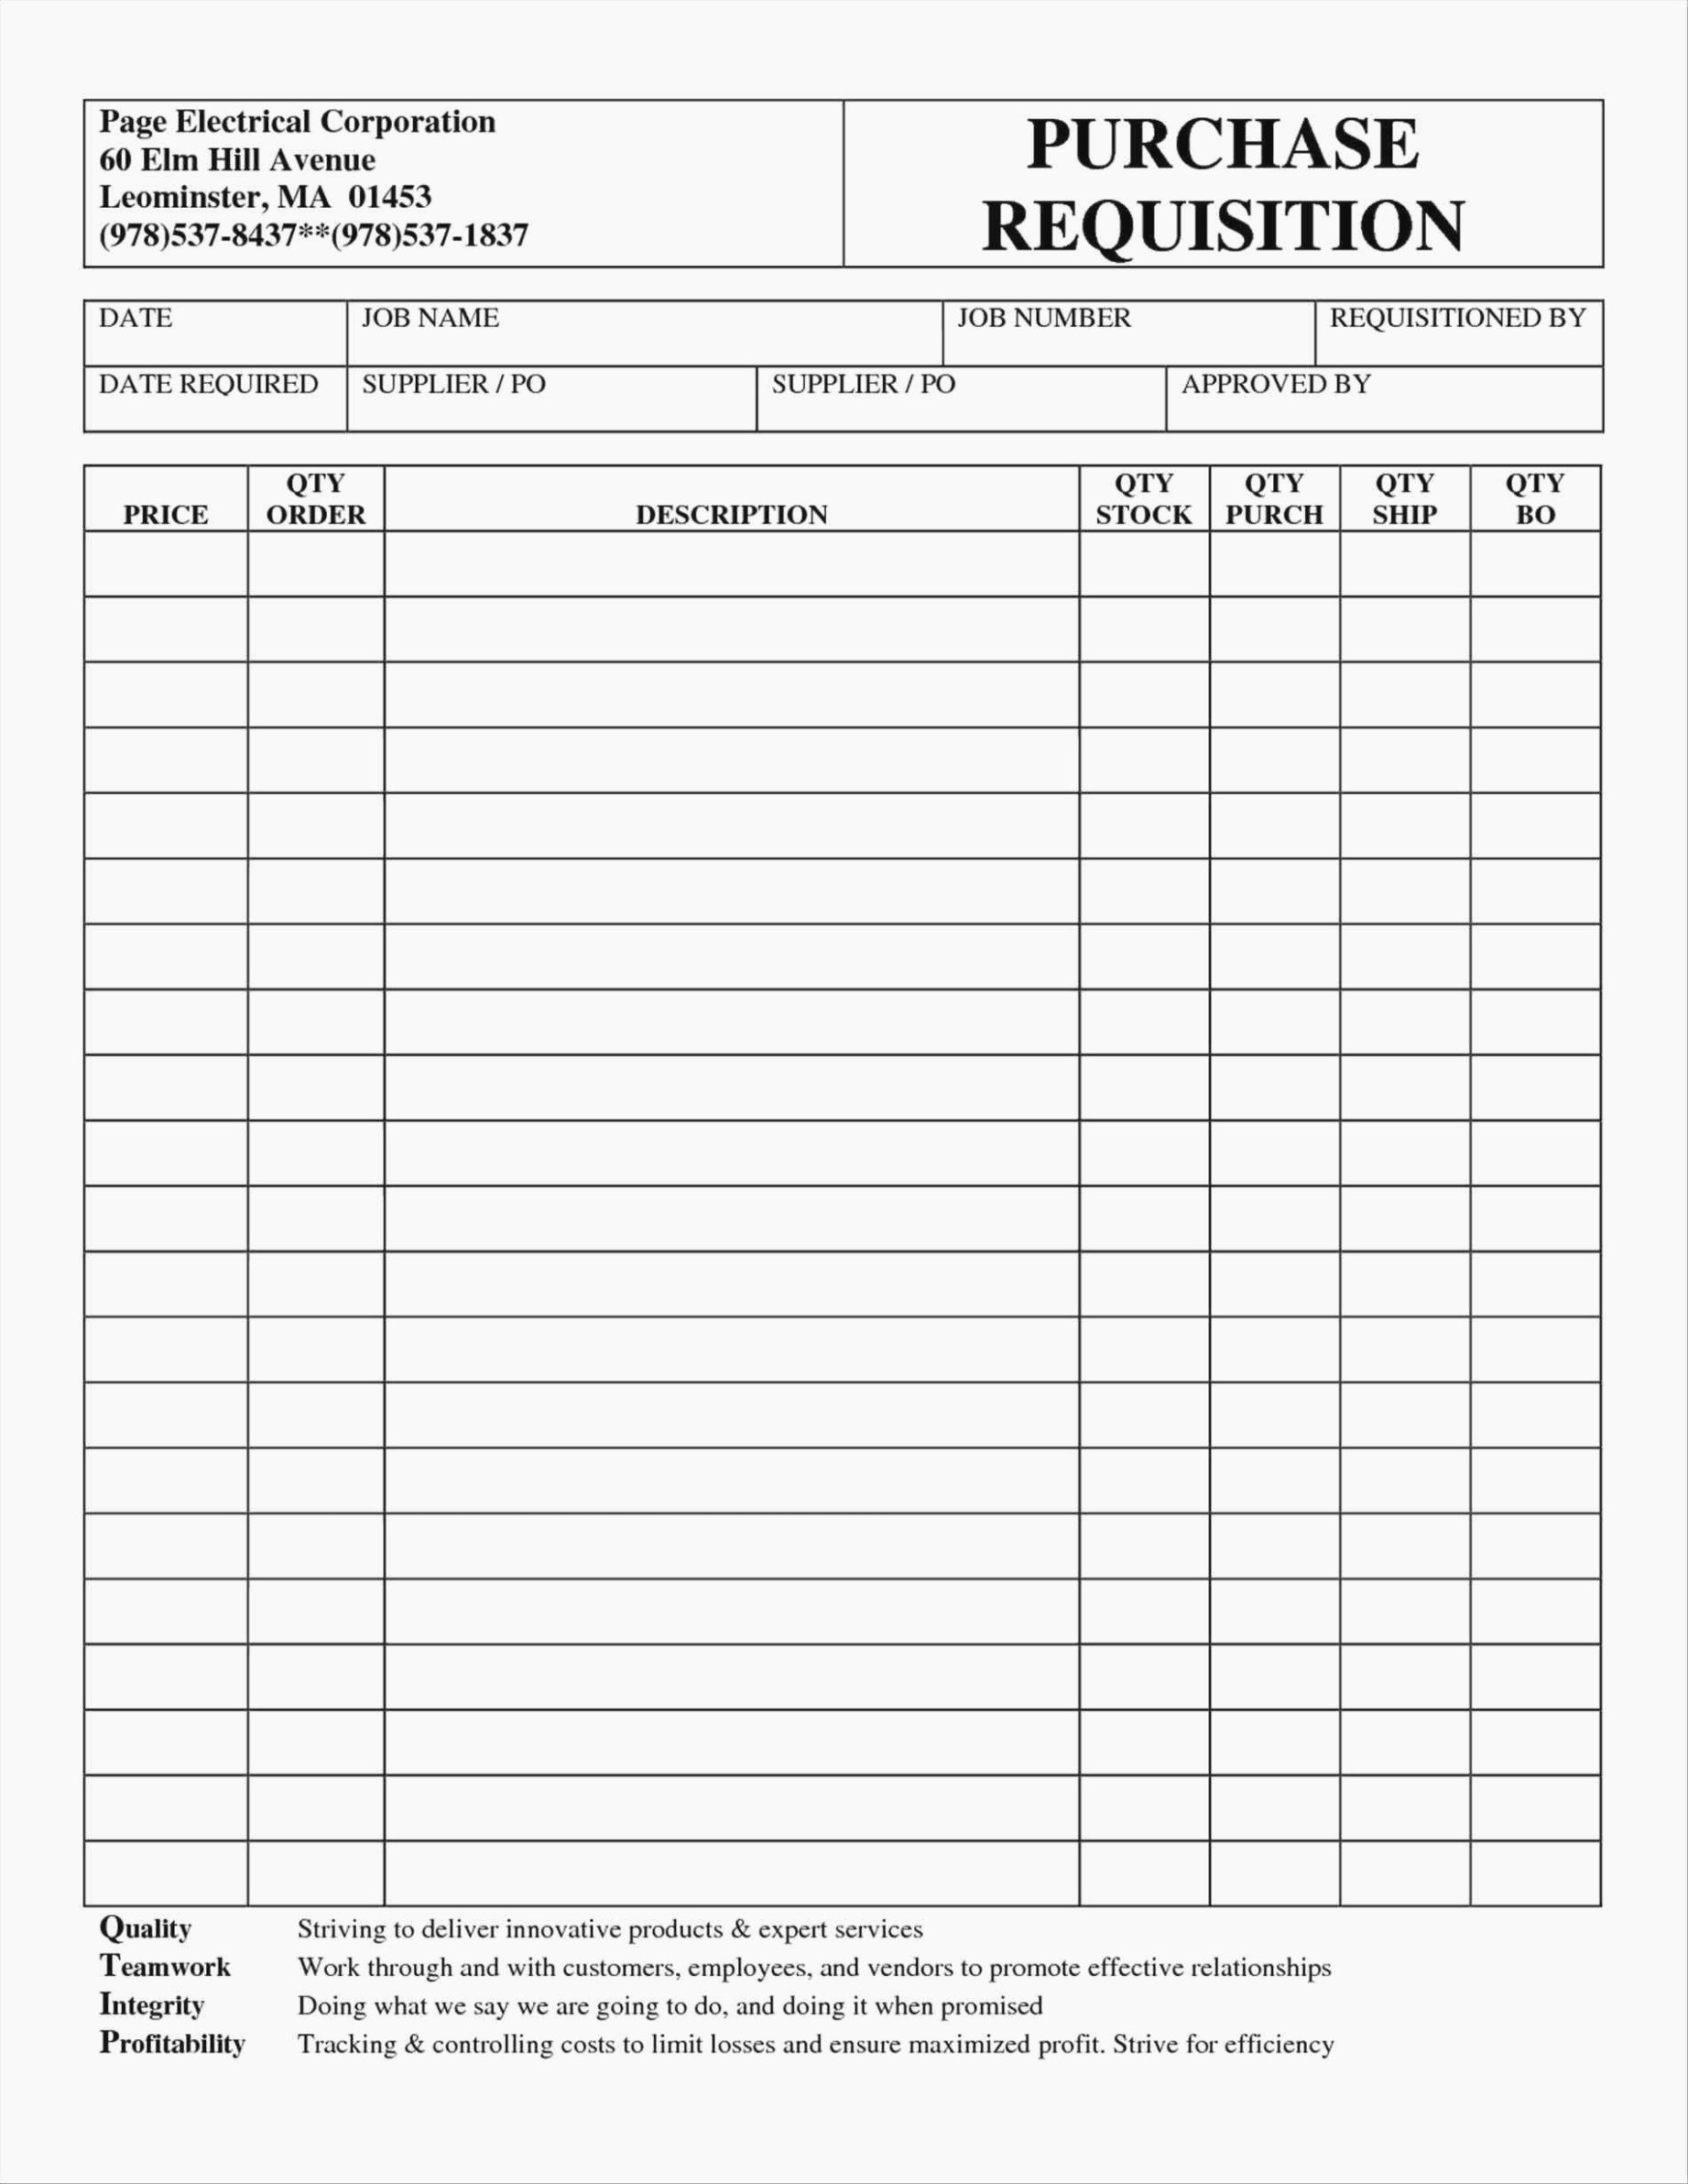 Purchasing Request form Template Unique Most Effective Ways to